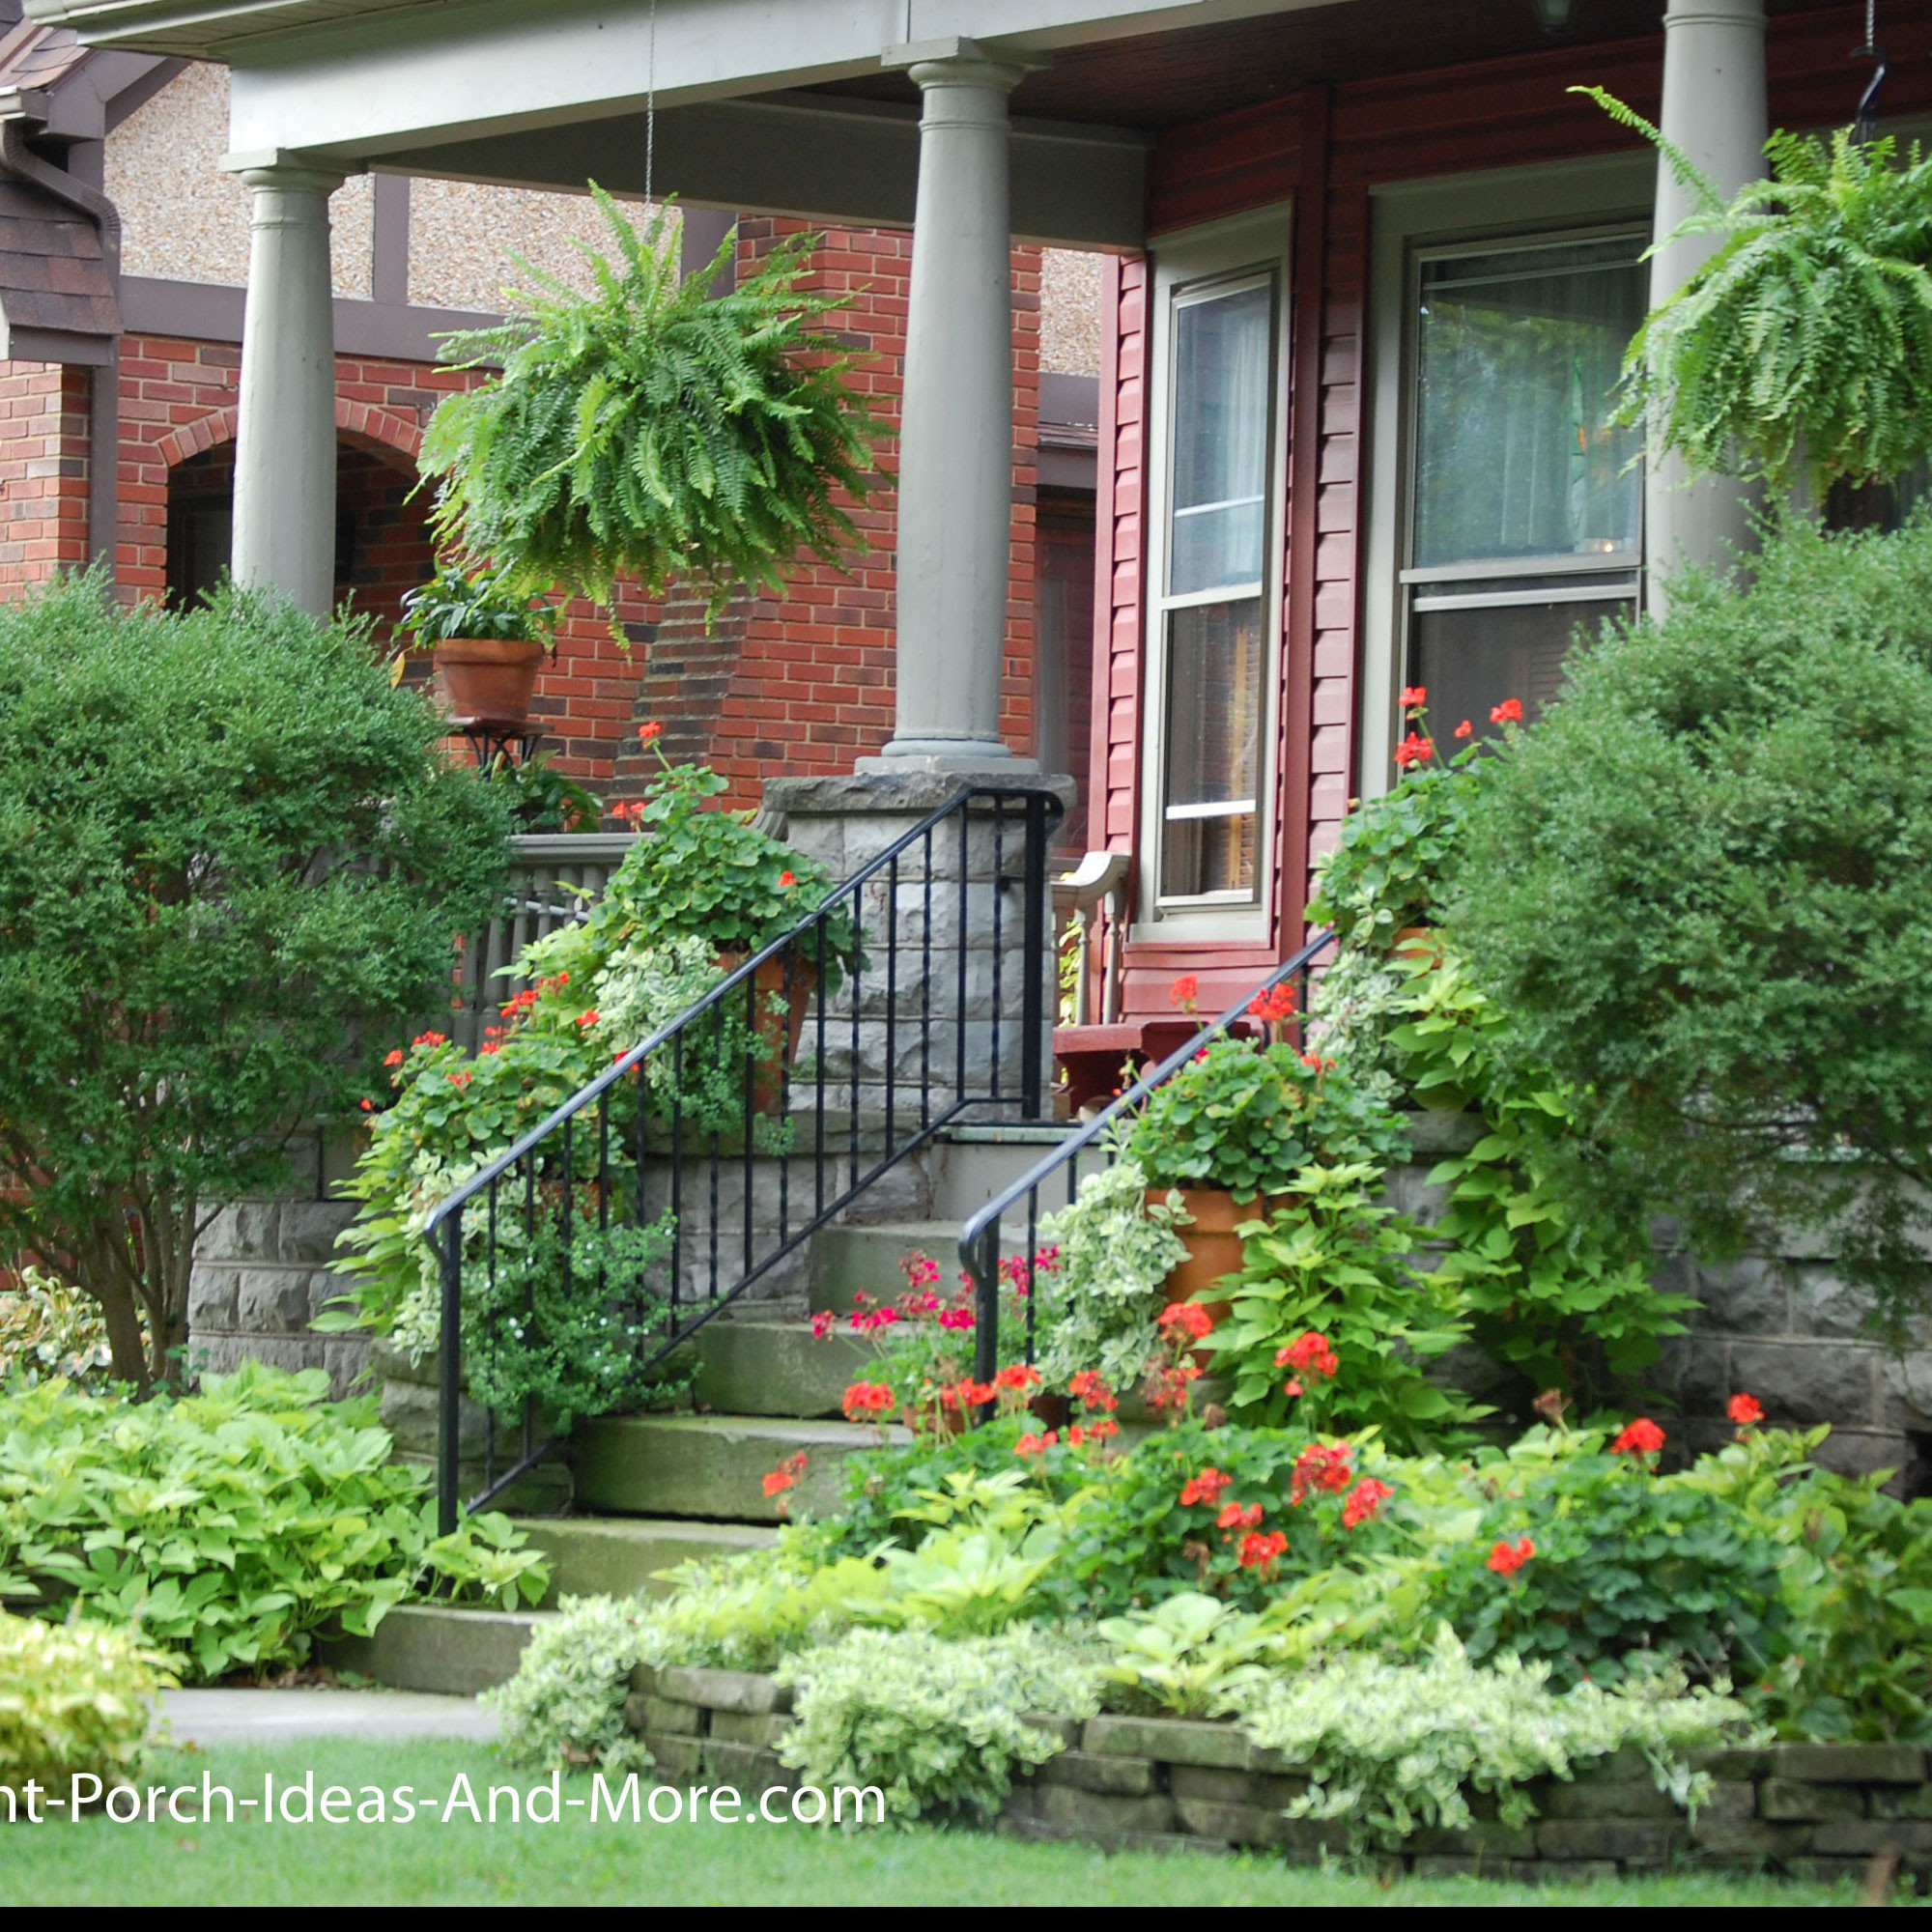 Front Porch Landscape Design
 Porch Landscaping Ideas for Your Front Yard and More